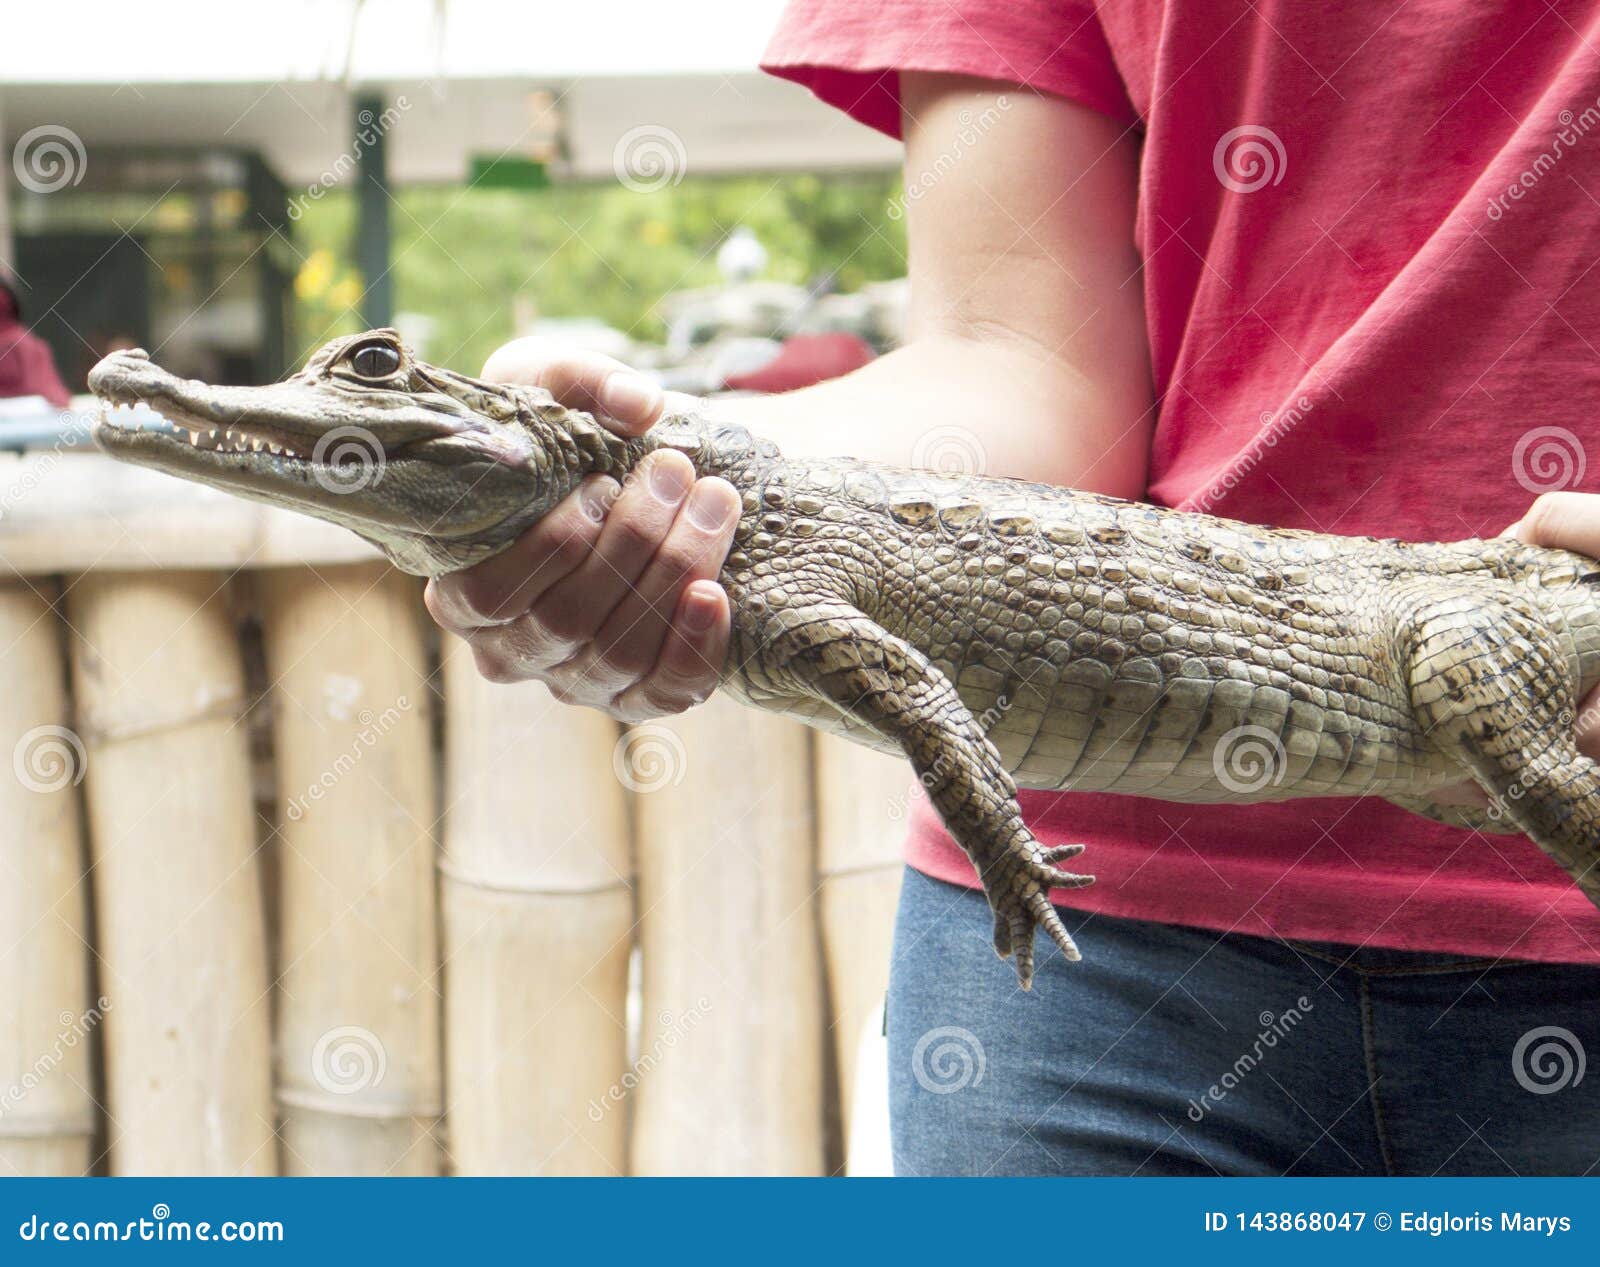 reptile show displaying spectacled caiman caiman crocodilus a crocodilian in the family alligatoridae,